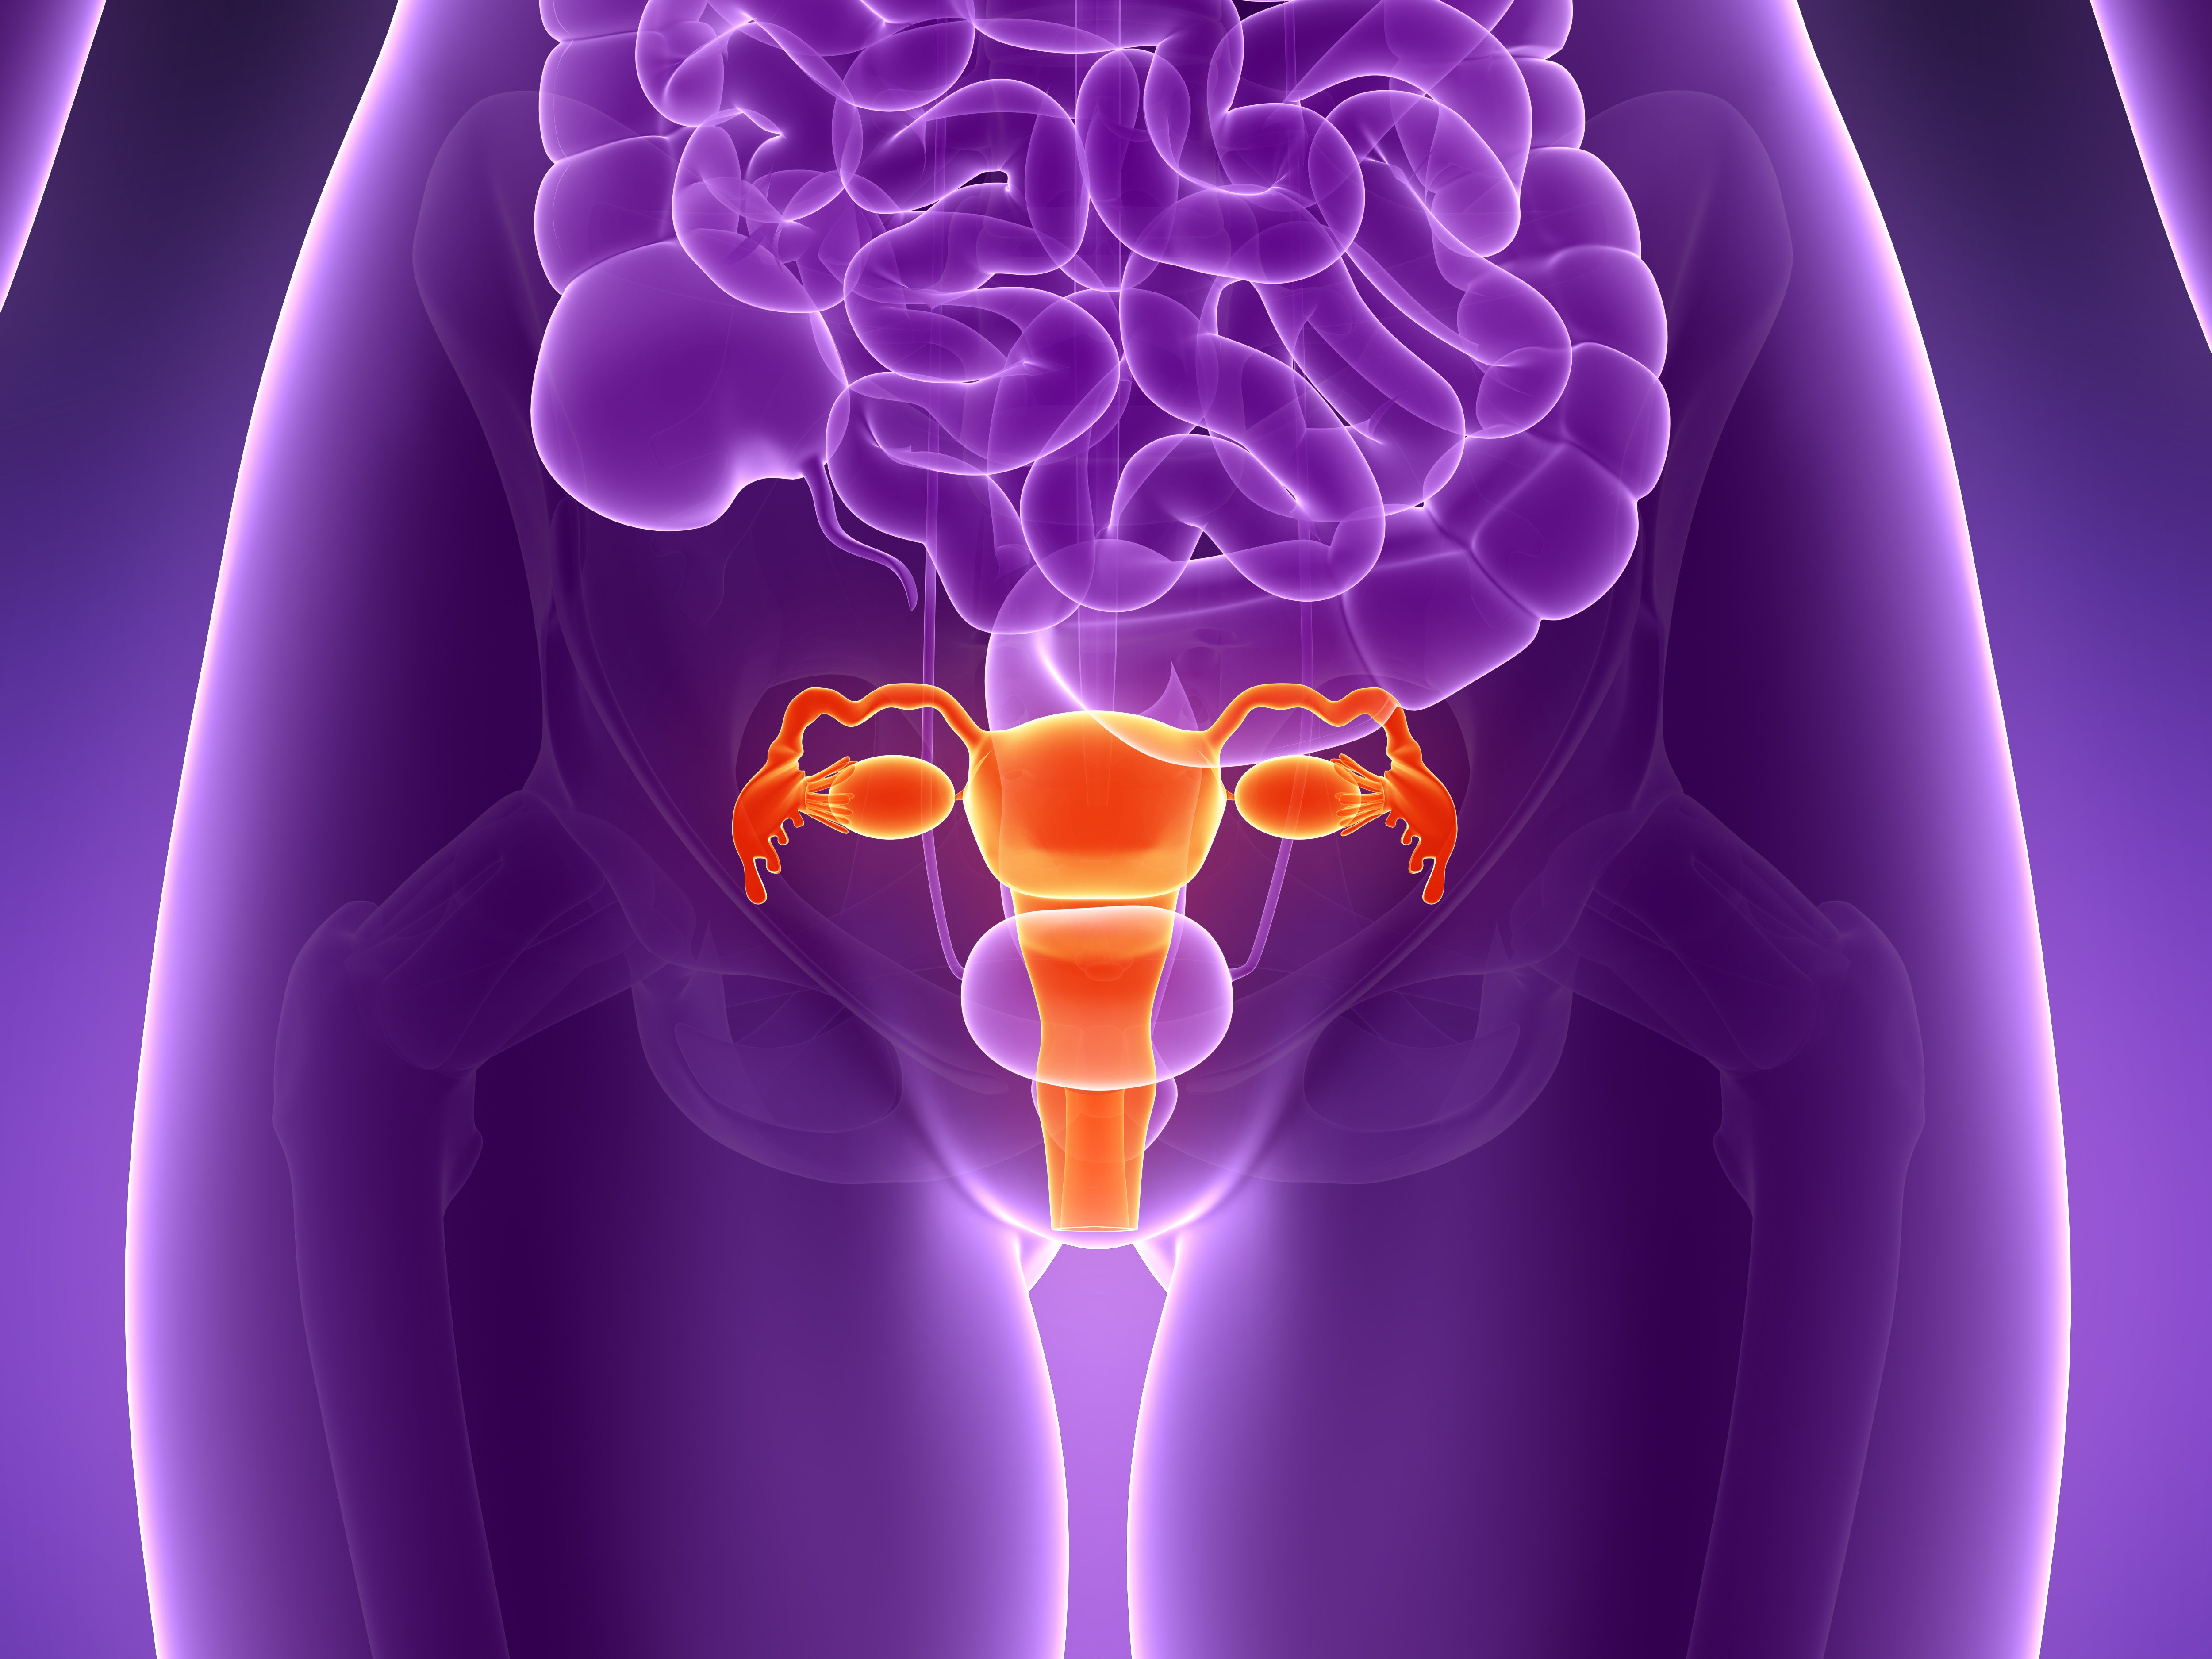 Neo-adjuvant chemotherapy for metastatic endometrial cancer : study finds benefit